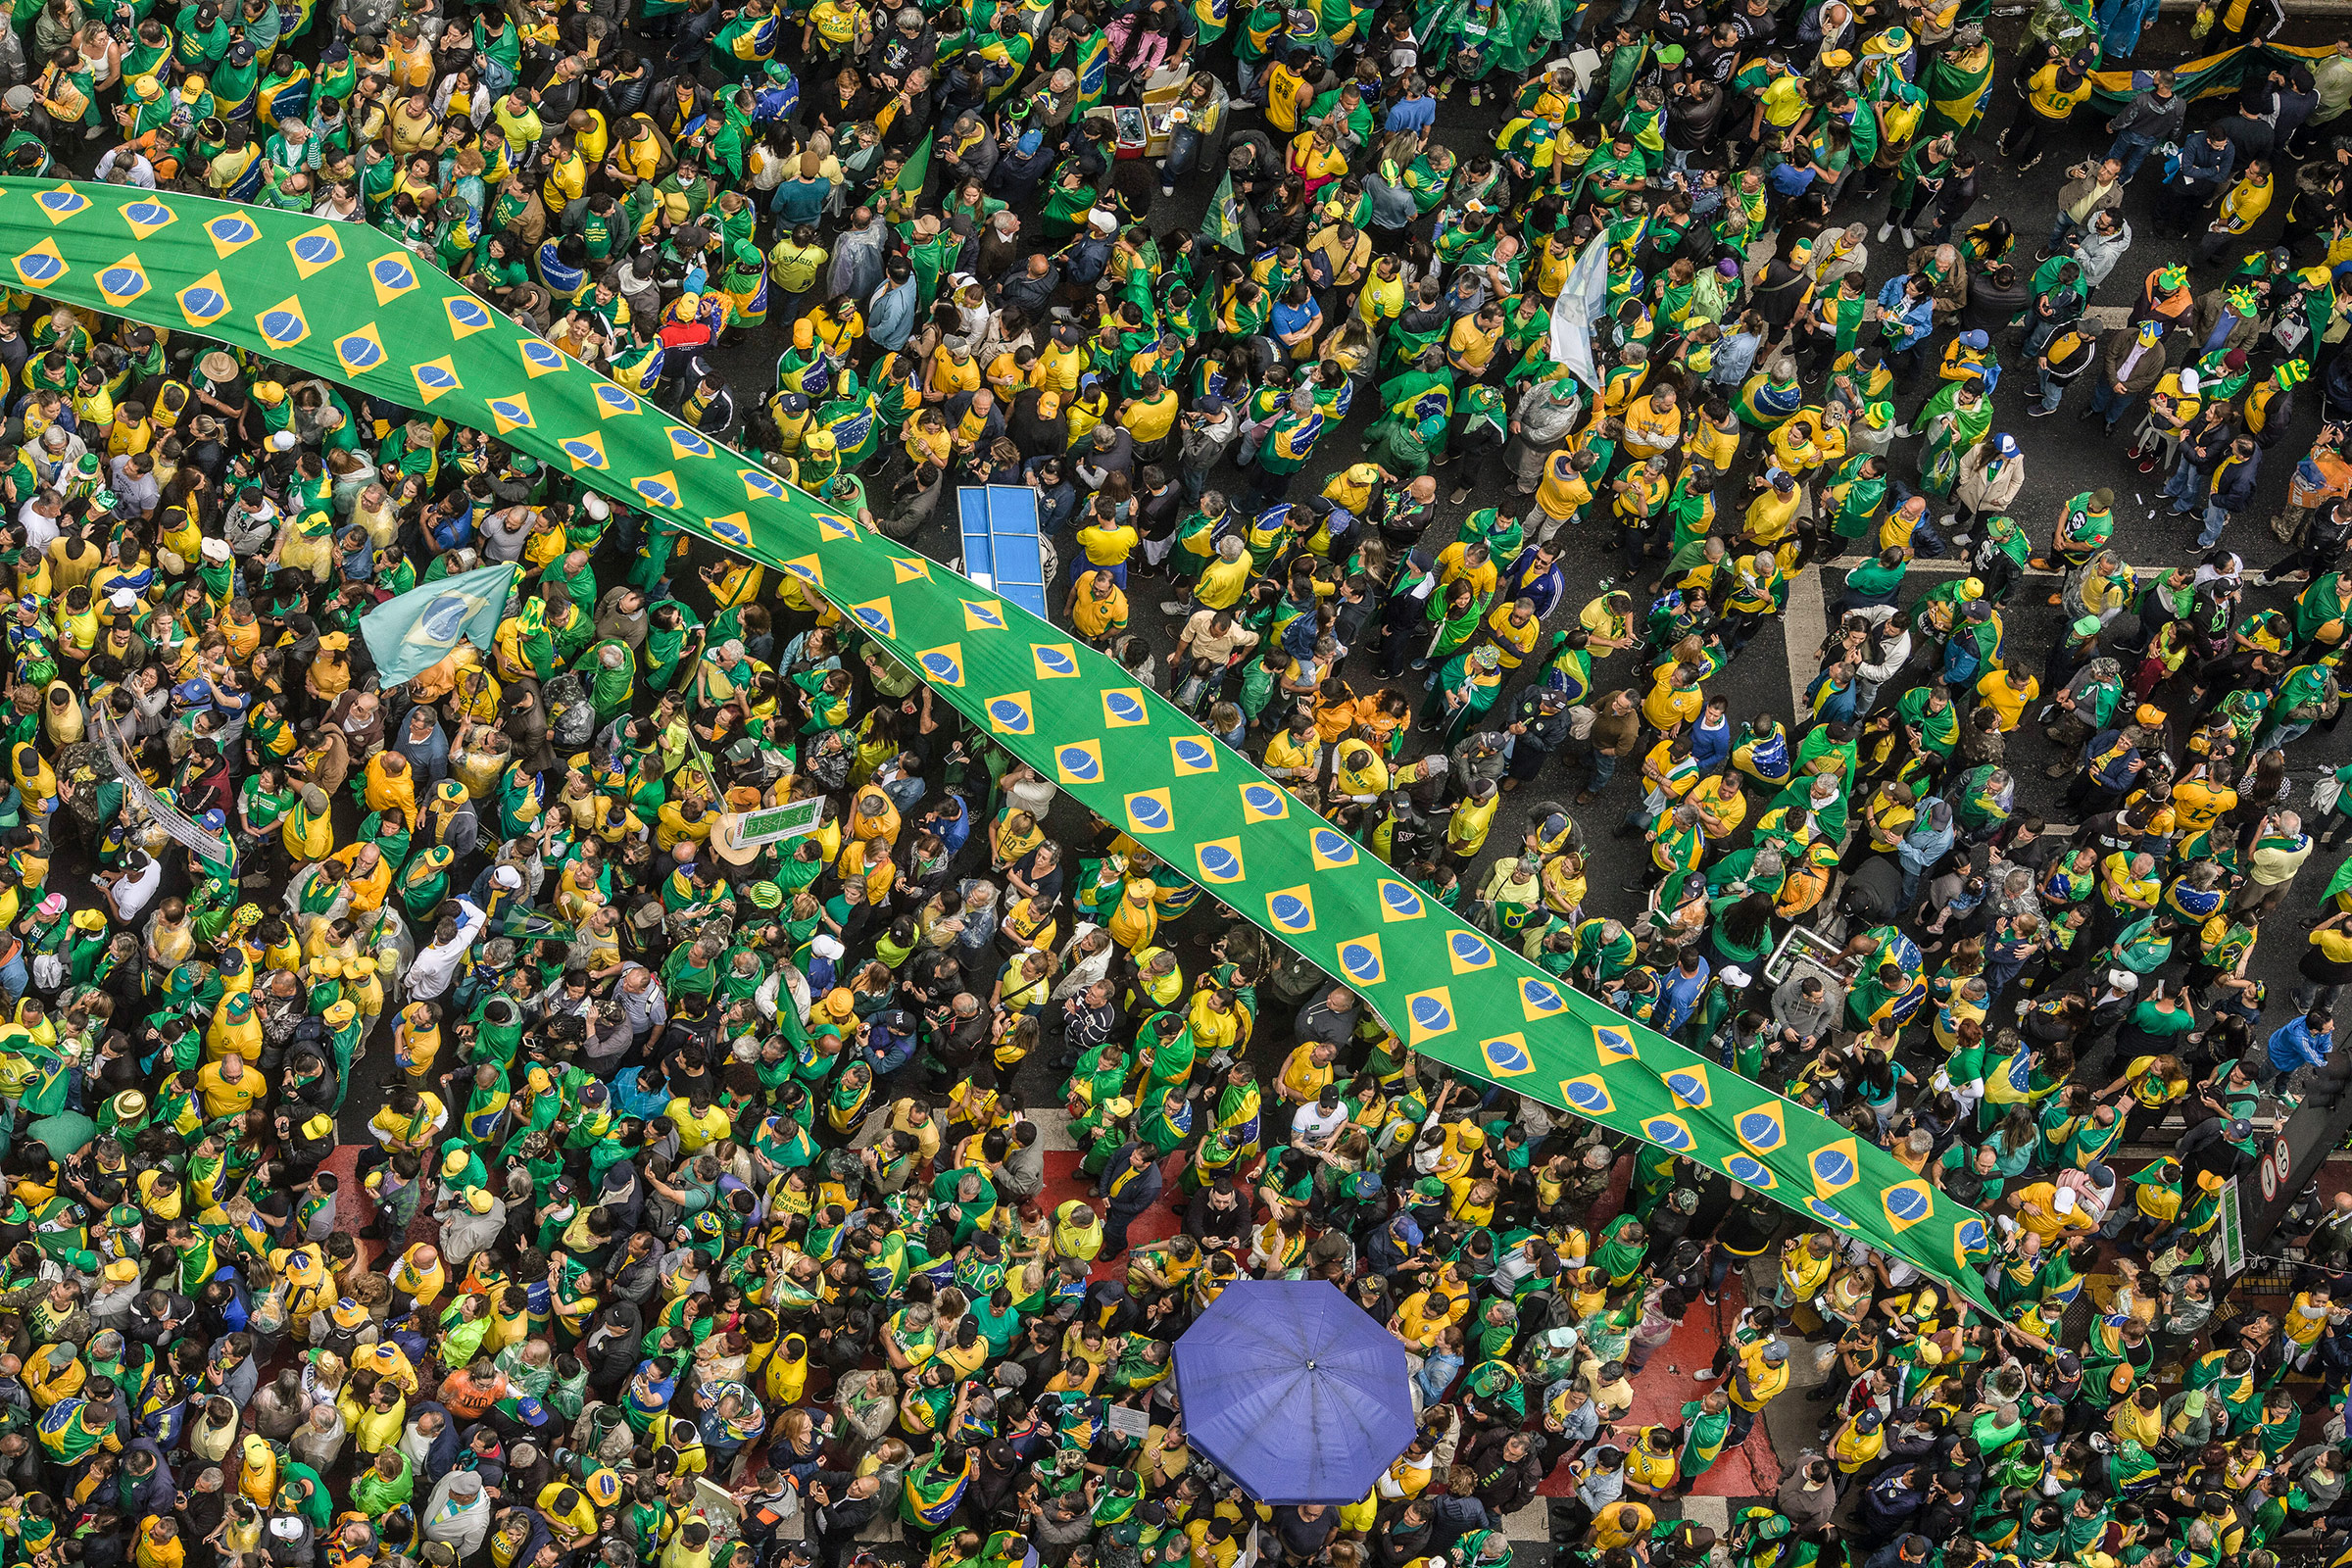 Supporters of President Jair Bolsonaro attend a rally and parade, held on the 200th anniversary of Brazil's independence, in São Paulo on Sept. 7. (Victor Moriyama—The New York Times/Redux)